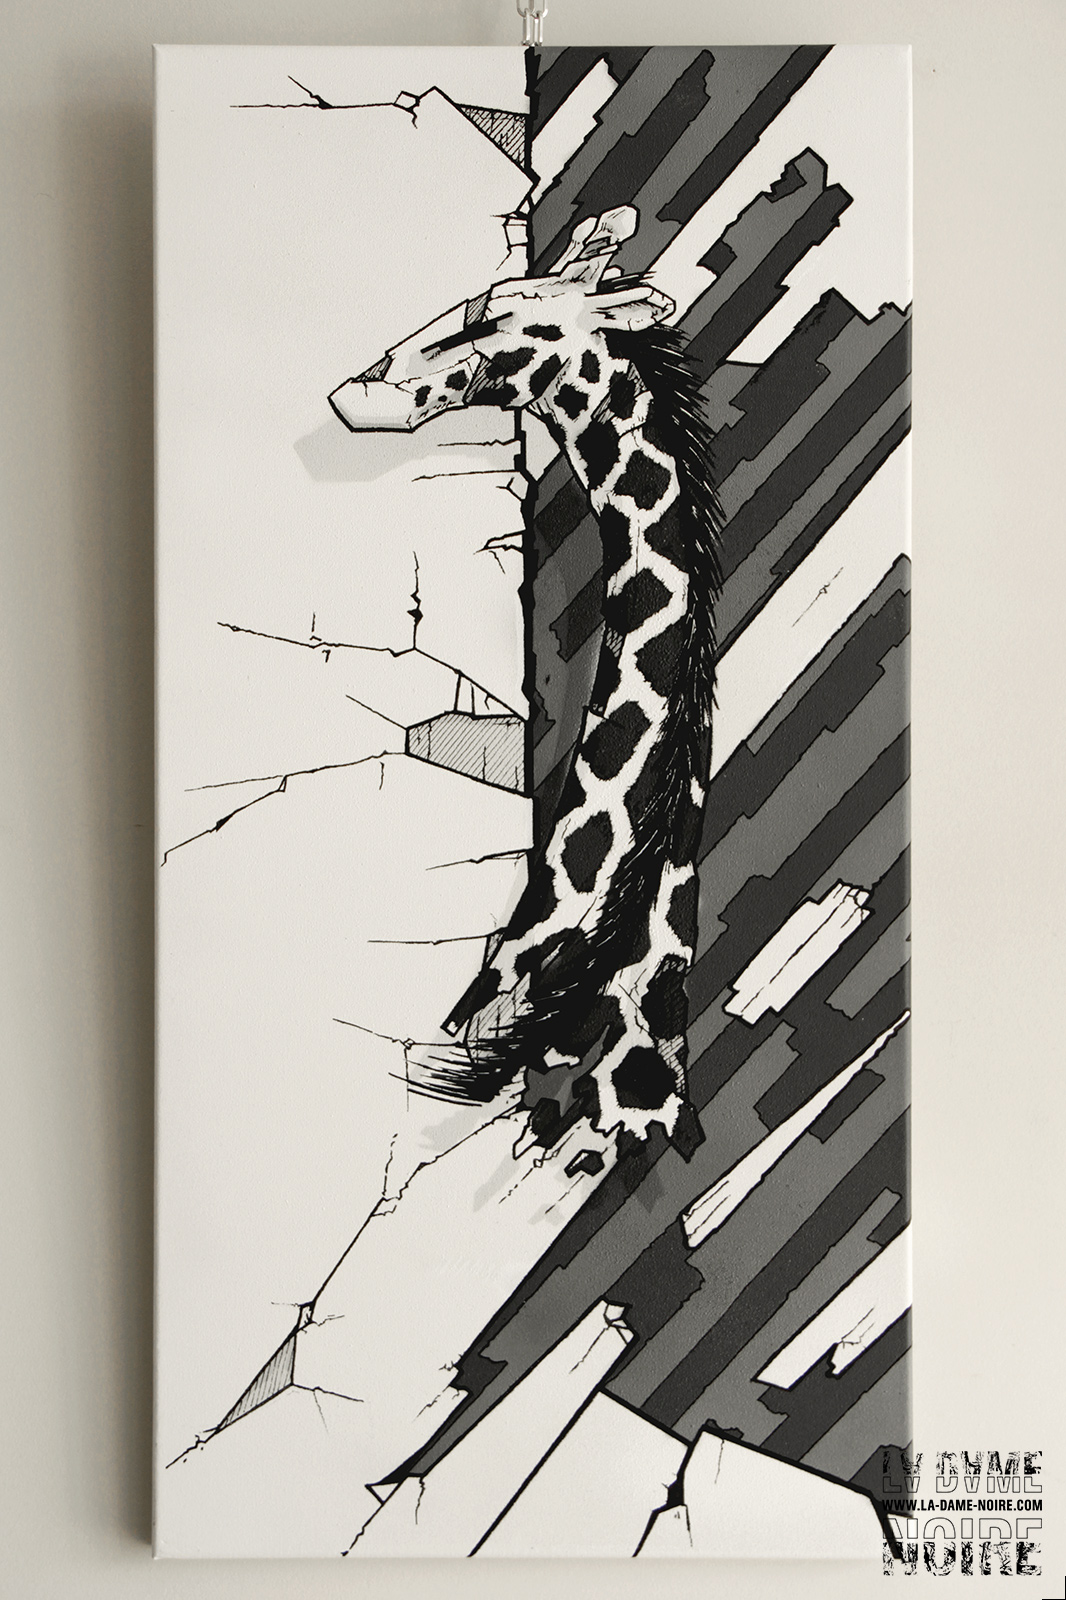 Painting of a stylized giraffe in shades of grey